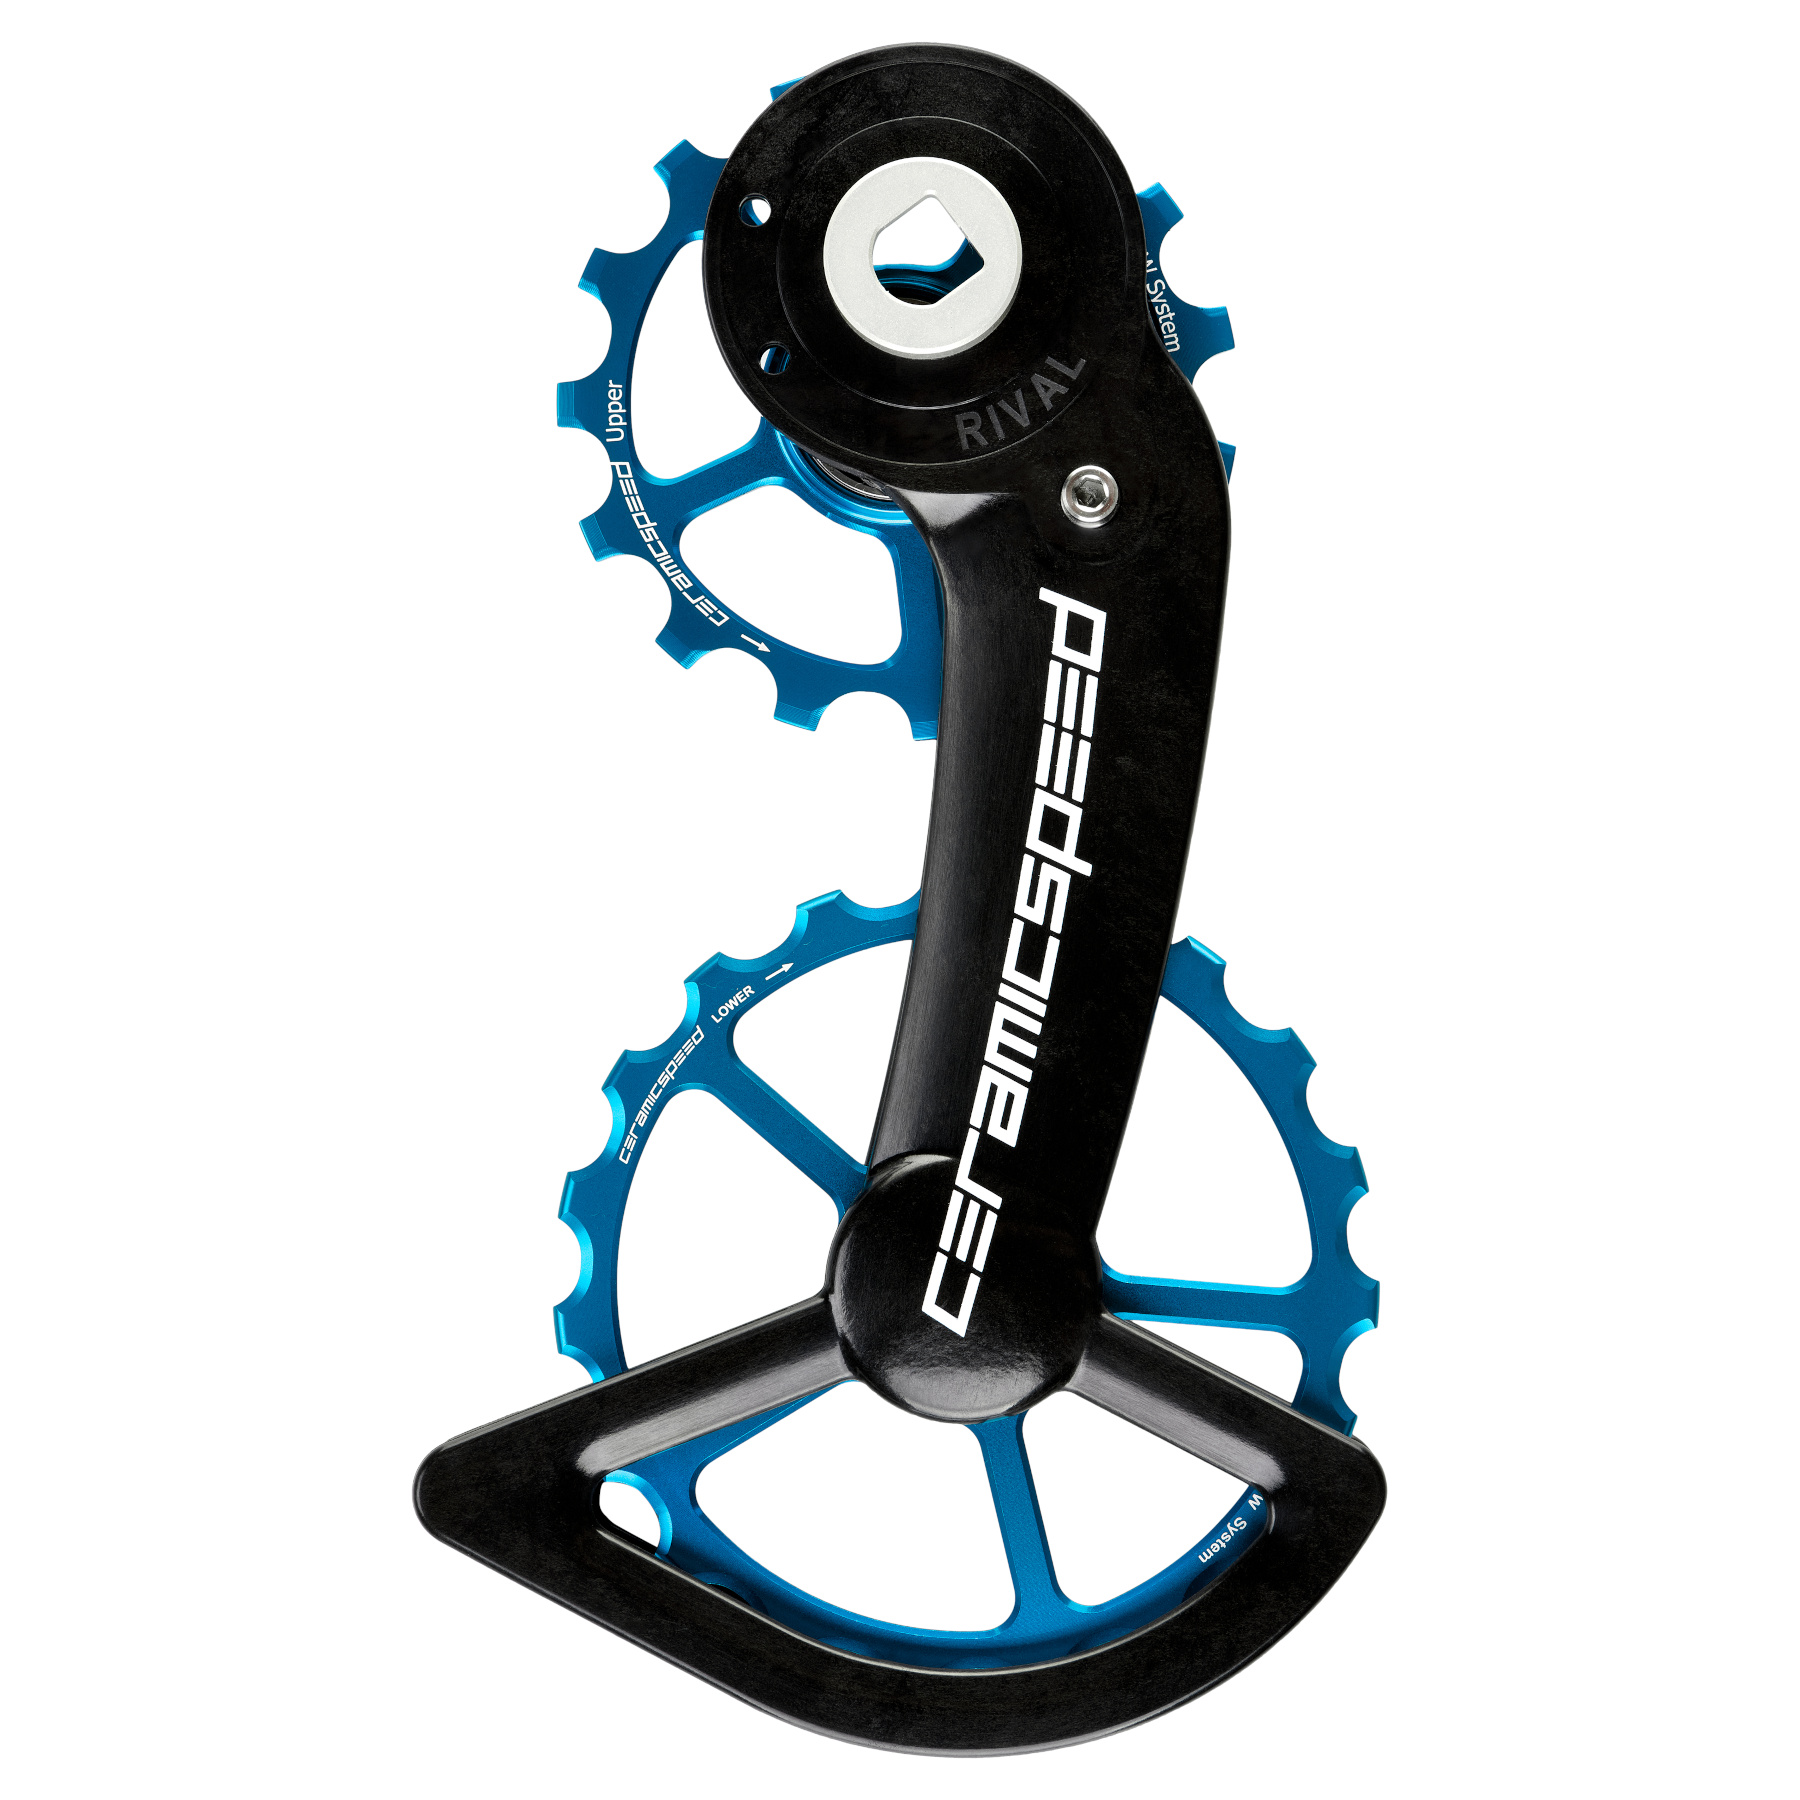 Picture of CeramicSpeed OSPW Derailleur Pulley System - for SRAM Rival AXS | 15/19 Teeth | Coated Bearings - Alternative Blue